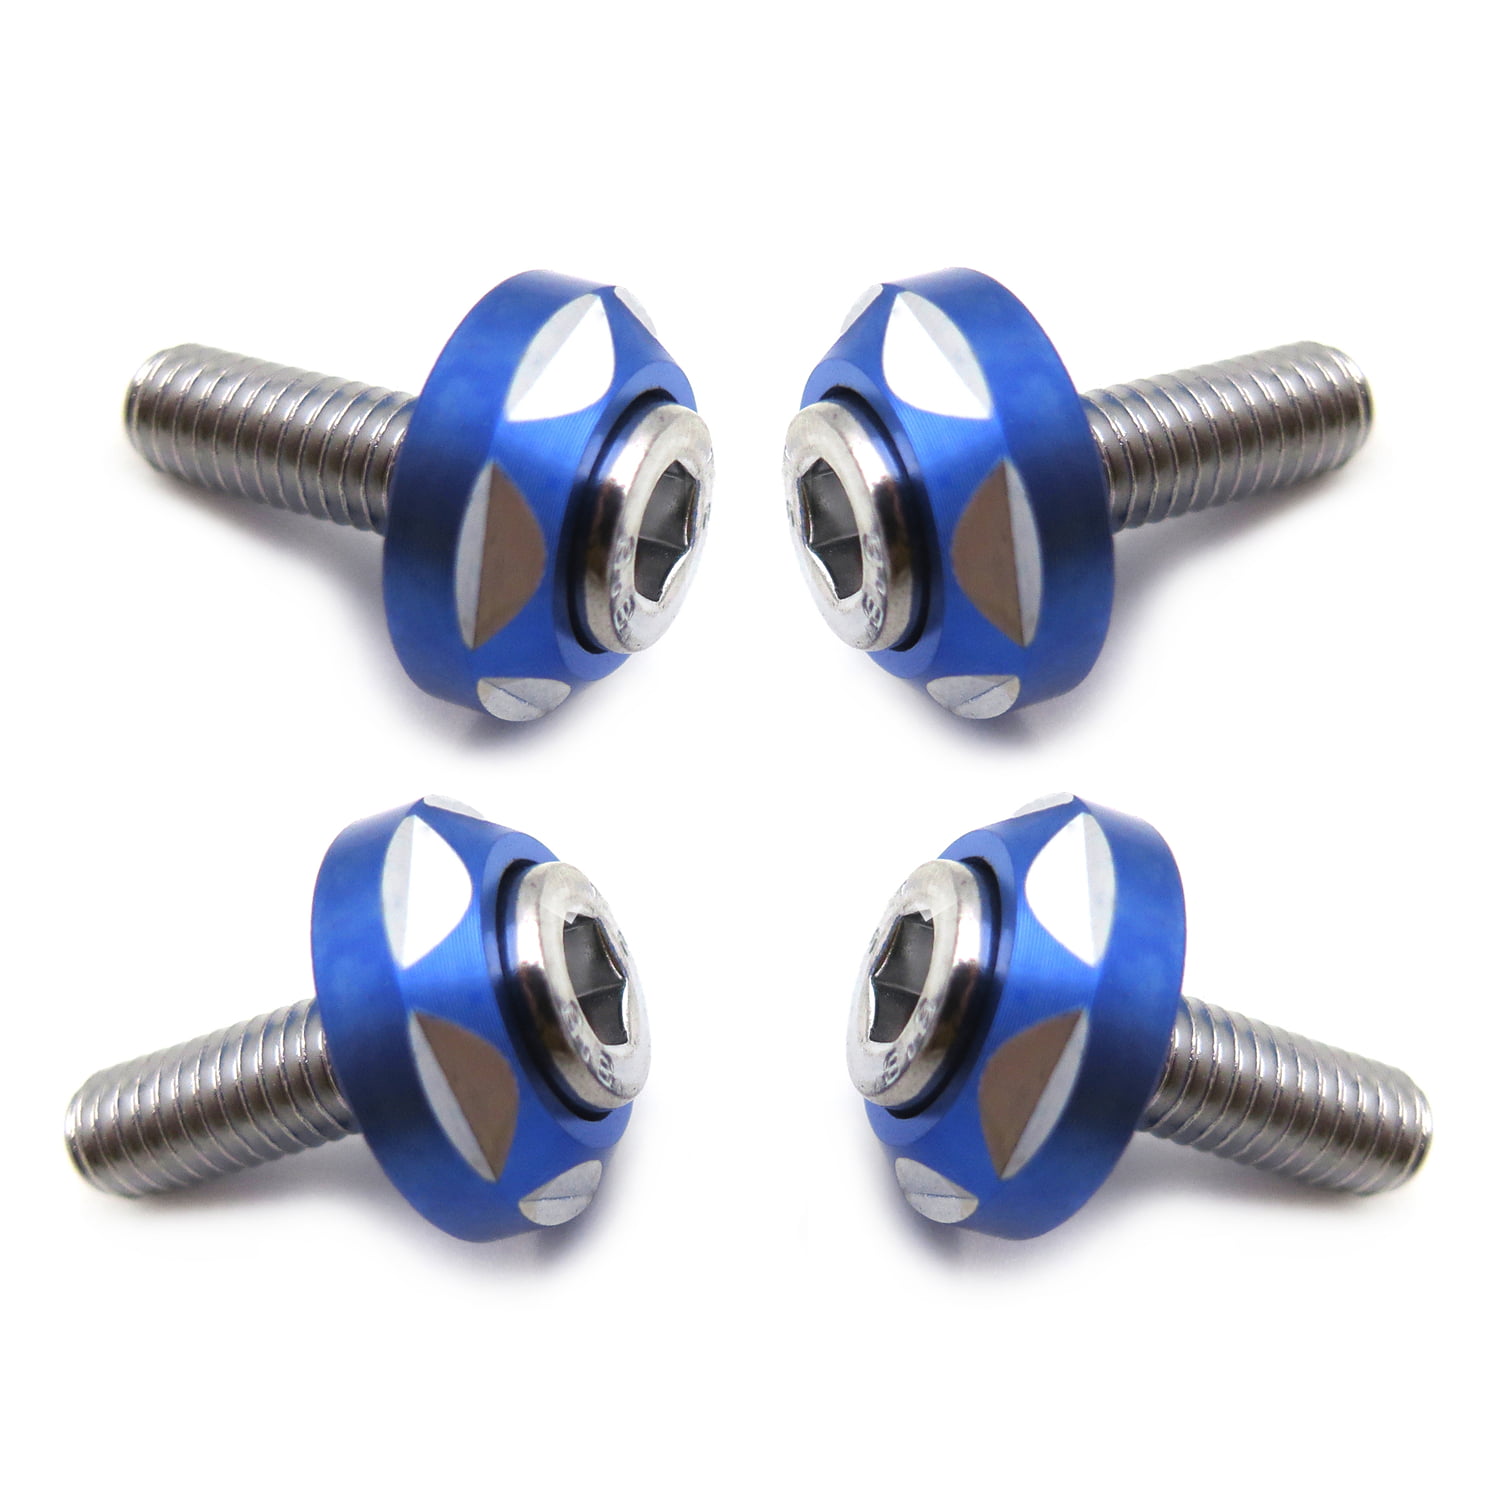 Car Motorcycle User 6mm XKMT- Gold Decorative License Plate Aluminum Alloy Bolt Screw Compatible with P/N: MT215-021 